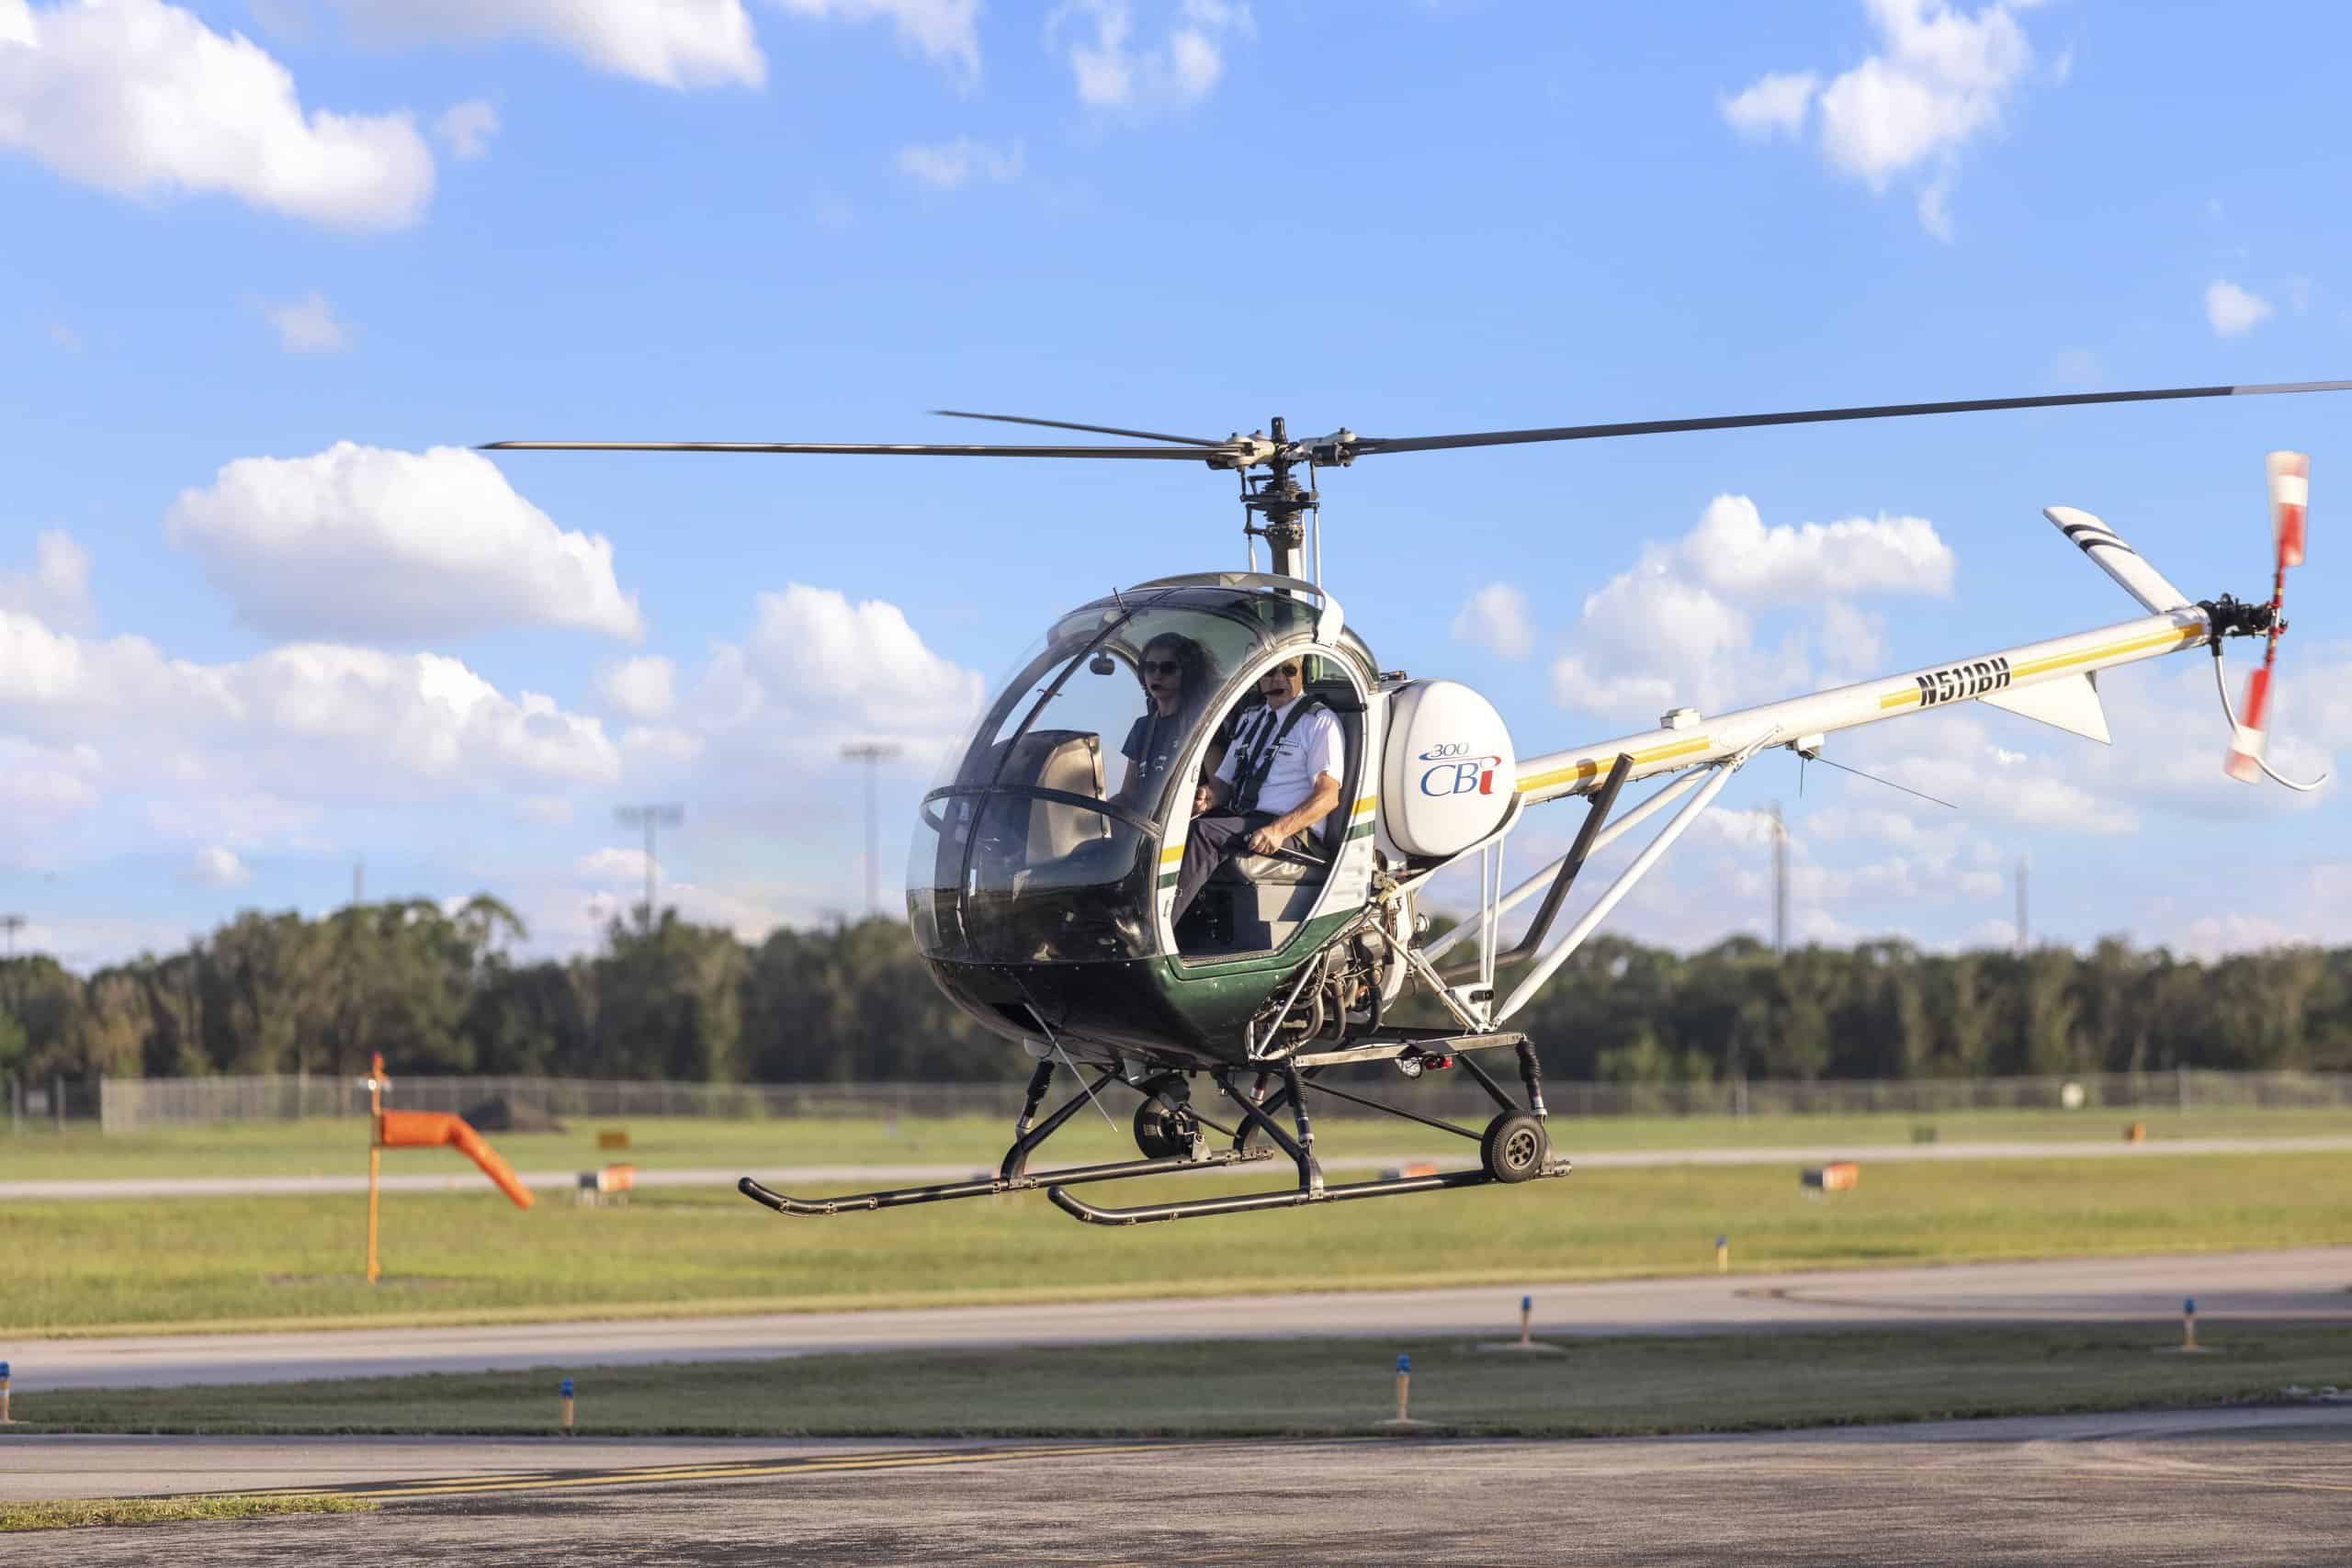 Photo of a helicopter hovering low over the tarmac